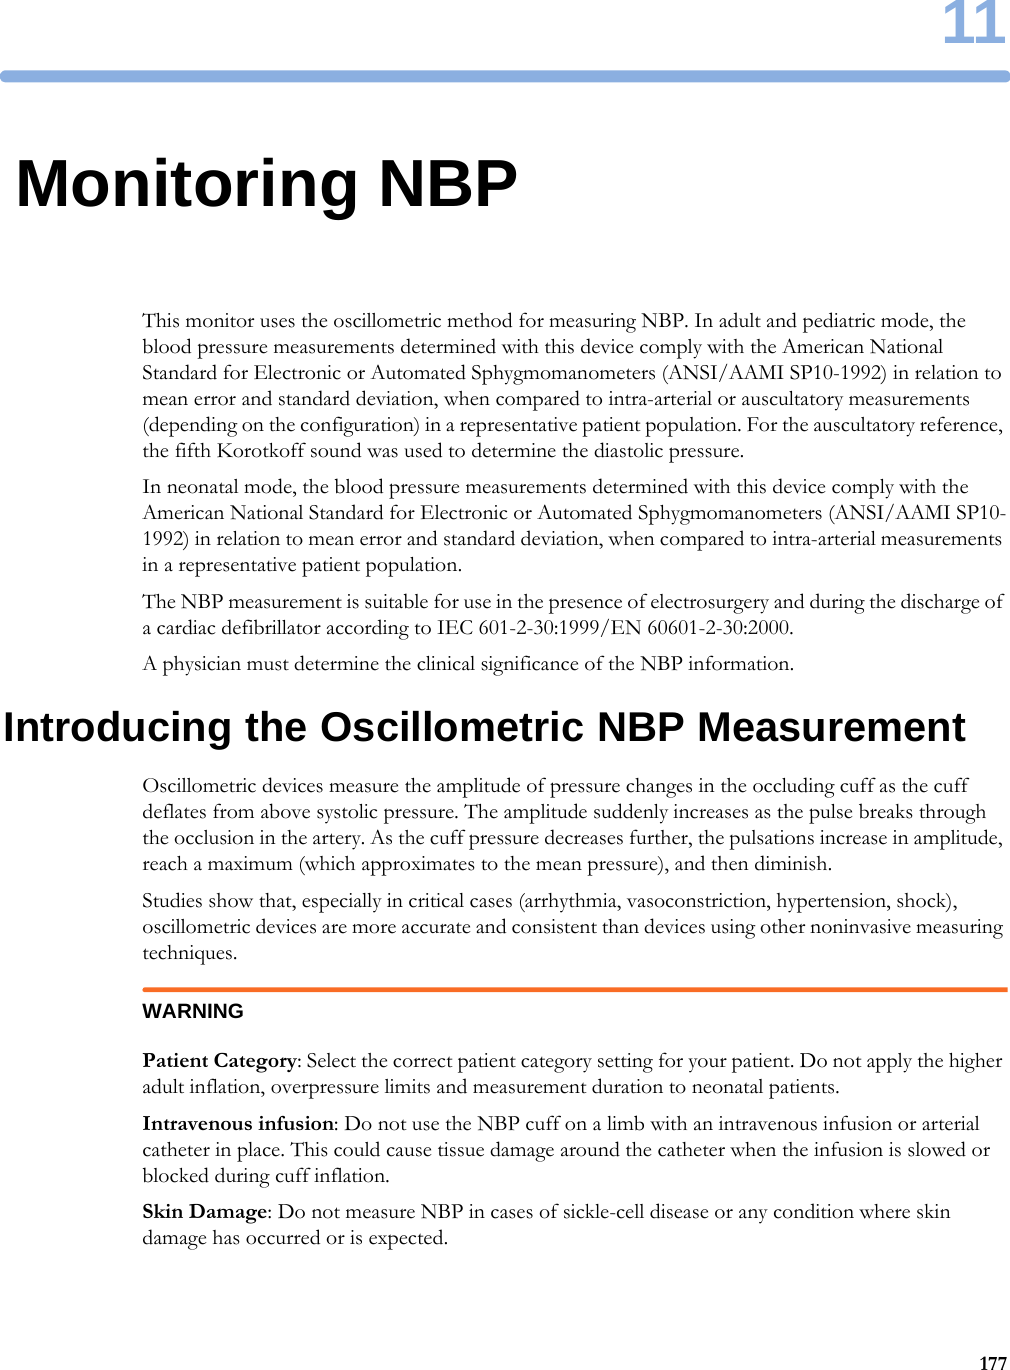 1117711Monitoring NBPThis monitor uses the oscillometric method for measuring NBP. In adult and pediatric mode, the blood pressure measurements determined with this device comply with the American National Standard for Electronic or Automated Sphygmomanometers (ANSI/AAMI SP10-1992) in relation to mean error and standard deviation, when compared to intra-arterial or auscultatory measurements (depending on the configuration) in a representative patient population. For the auscultatory reference, the fifth Korotkoff sound was used to determine the diastolic pressure.In neonatal mode, the blood pressure measurements determined with this device comply with the American National Standard for Electronic or Automated Sphygmomanometers (ANSI/AAMI SP10-1992) in relation to mean error and standard deviation, when compared to intra-arterial measurements in a representative patient population.The NBP measurement is suitable for use in the presence of electrosurgery and during the discharge of a cardiac defibrillator according to IEC 601-2-30:1999/EN 60601-2-30:2000.A physician must determine the clinical significance of the NBP information.Introducing the Oscillometric NBP MeasurementOscillometric devices measure the amplitude of pressure changes in the occluding cuff as the cuff deflates from above systolic pressure. The amplitude suddenly increases as the pulse breaks through the occlusion in the artery. As the cuff pressure decreases further, the pulsations increase in amplitude, reach a maximum (which approximates to the mean pressure), and then diminish.Studies show that, especially in critical cases (arrhythmia, vasoconstriction, hypertension, shock), oscillometric devices are more accurate and consistent than devices using other noninvasive measuring techniques.WARNINGPatient Category: Select the correct patient category setting for your patient. Do not apply the higher adult inflation, overpressure limits and measurement duration to neonatal patients.Intravenous infusion: Do not use the NBP cuff on a limb with an intravenous infusion or arterial catheter in place. This could cause tissue damage around the catheter when the infusion is slowed or blocked during cuff inflation.Skin Damage: Do not measure NBP in cases of sickle-cell disease or any condition where skin damage has occurred or is expected.